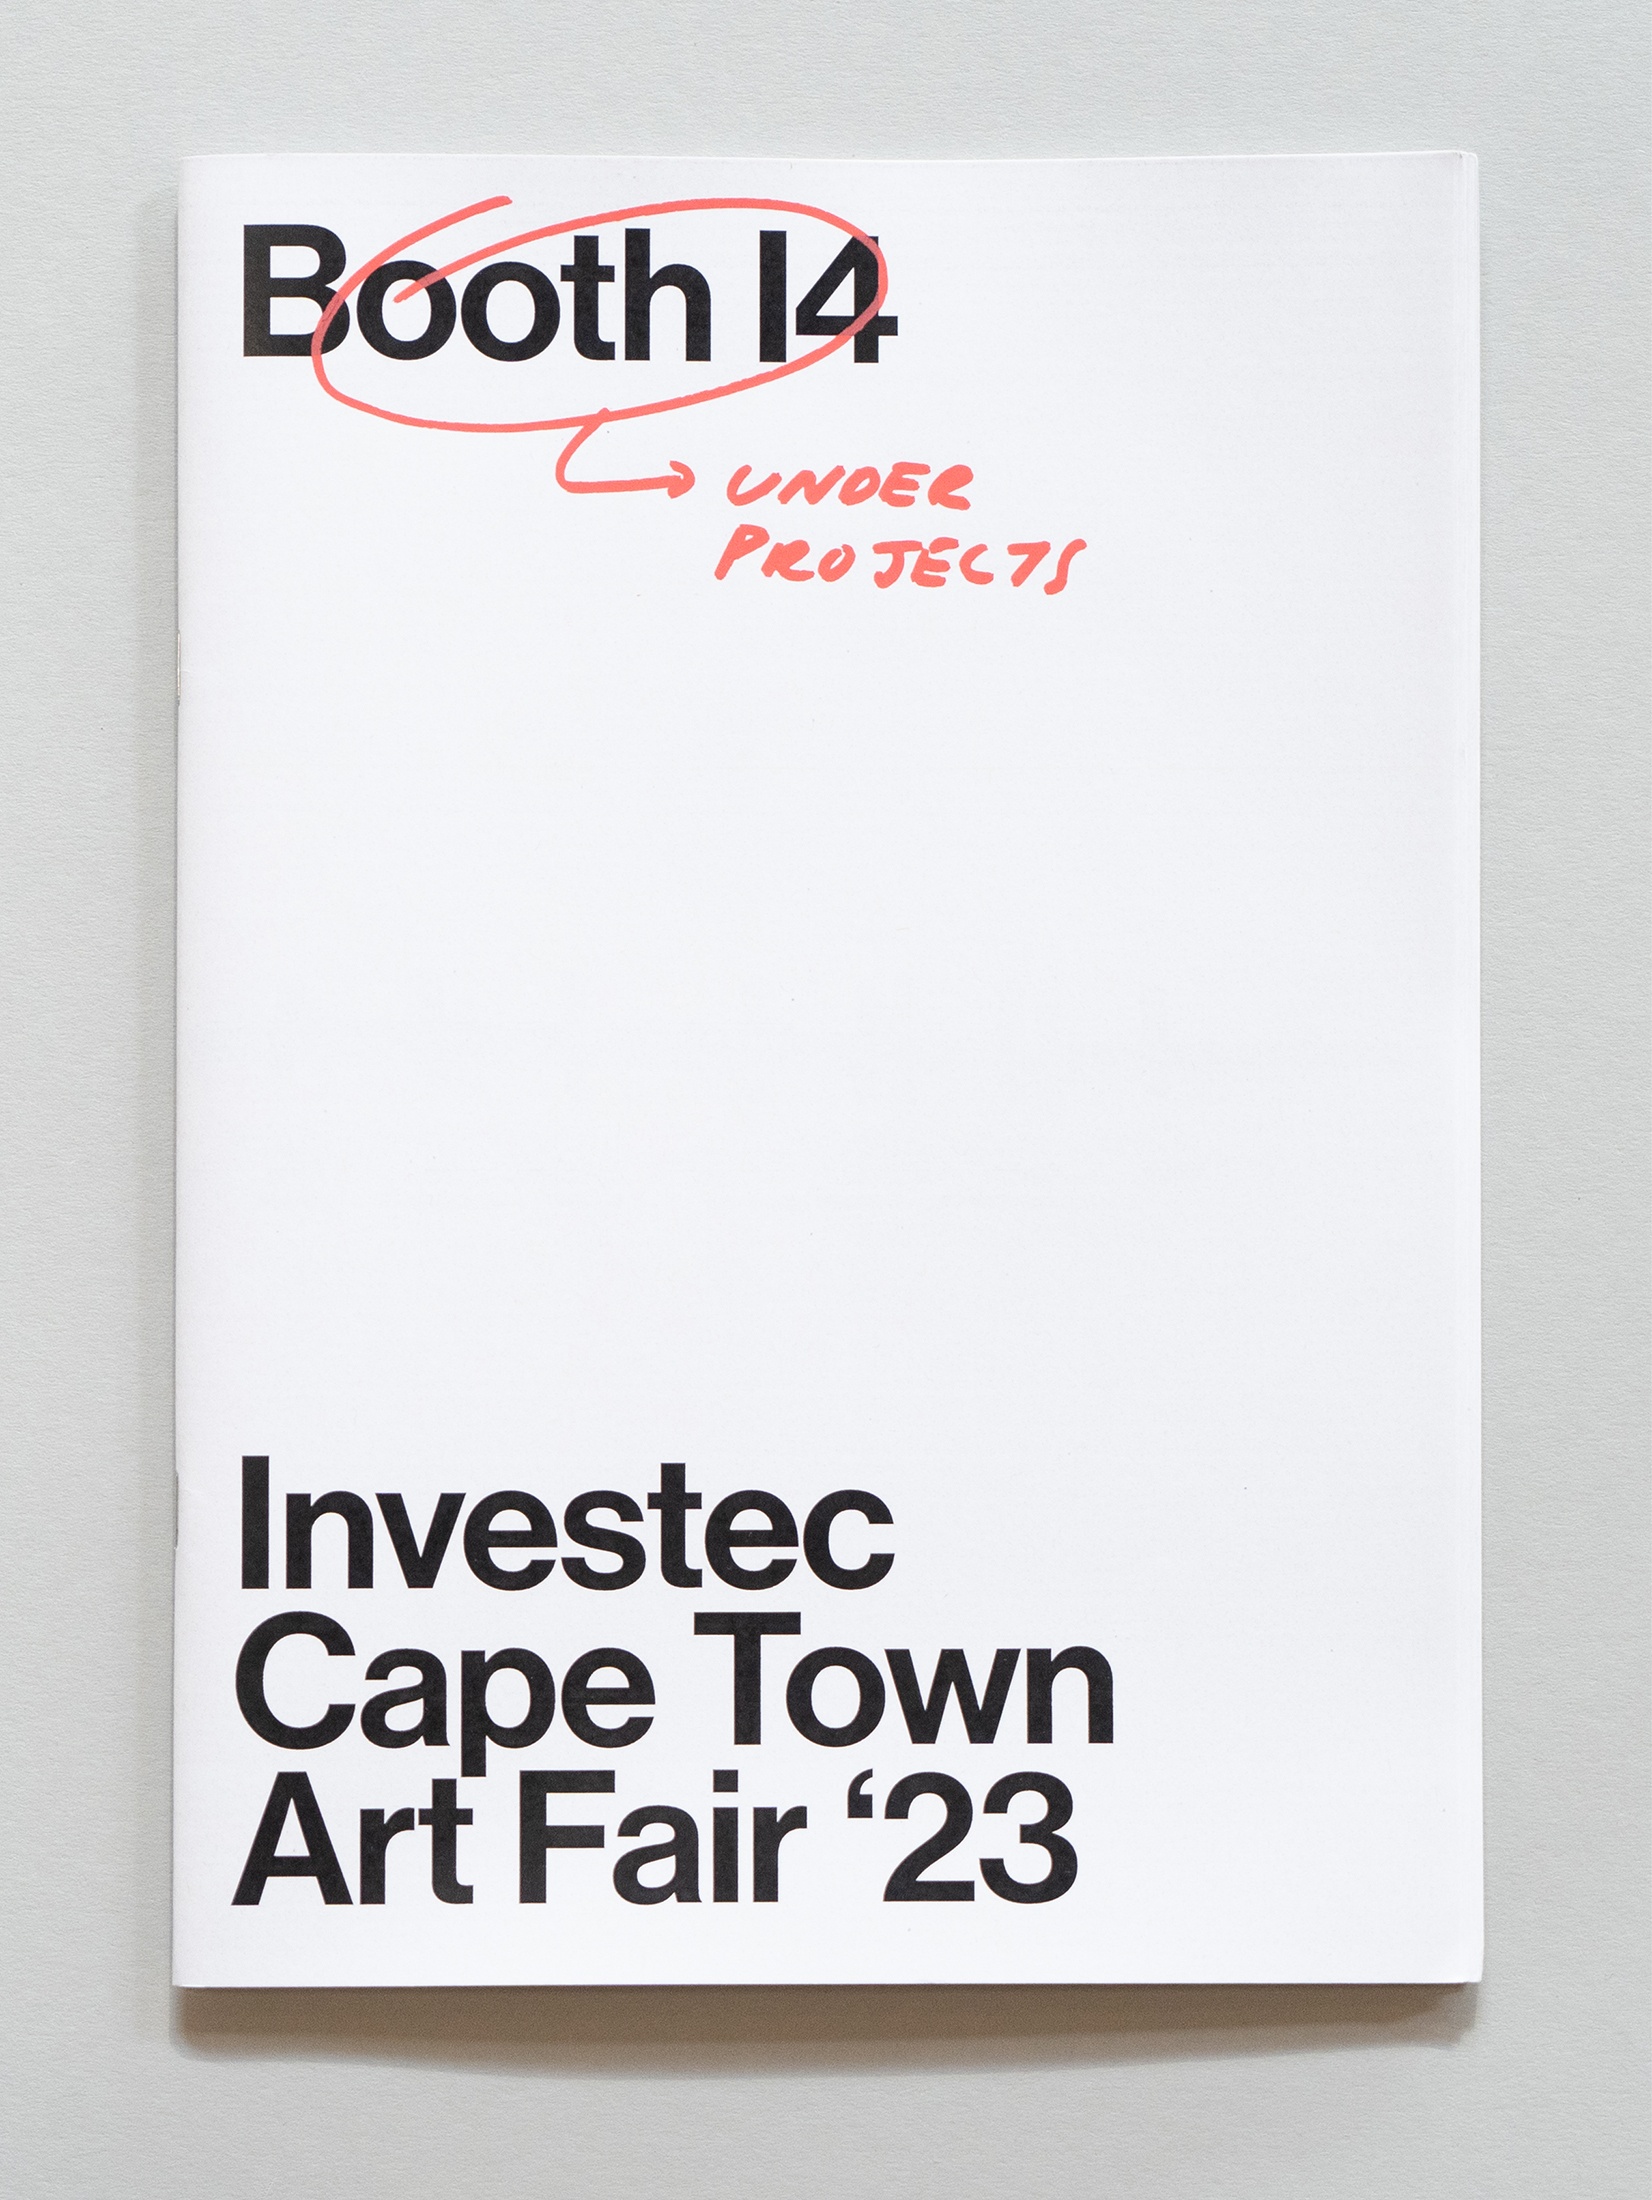 Photograph of the wayfinder publication for Under Projects x A4, Booth 14 curated by Mitchell Gilbert Messina, Luca Evans, Brett Charles Seiler and Guy Simpson at the 2023 Investec Cape Town Art Fair.
